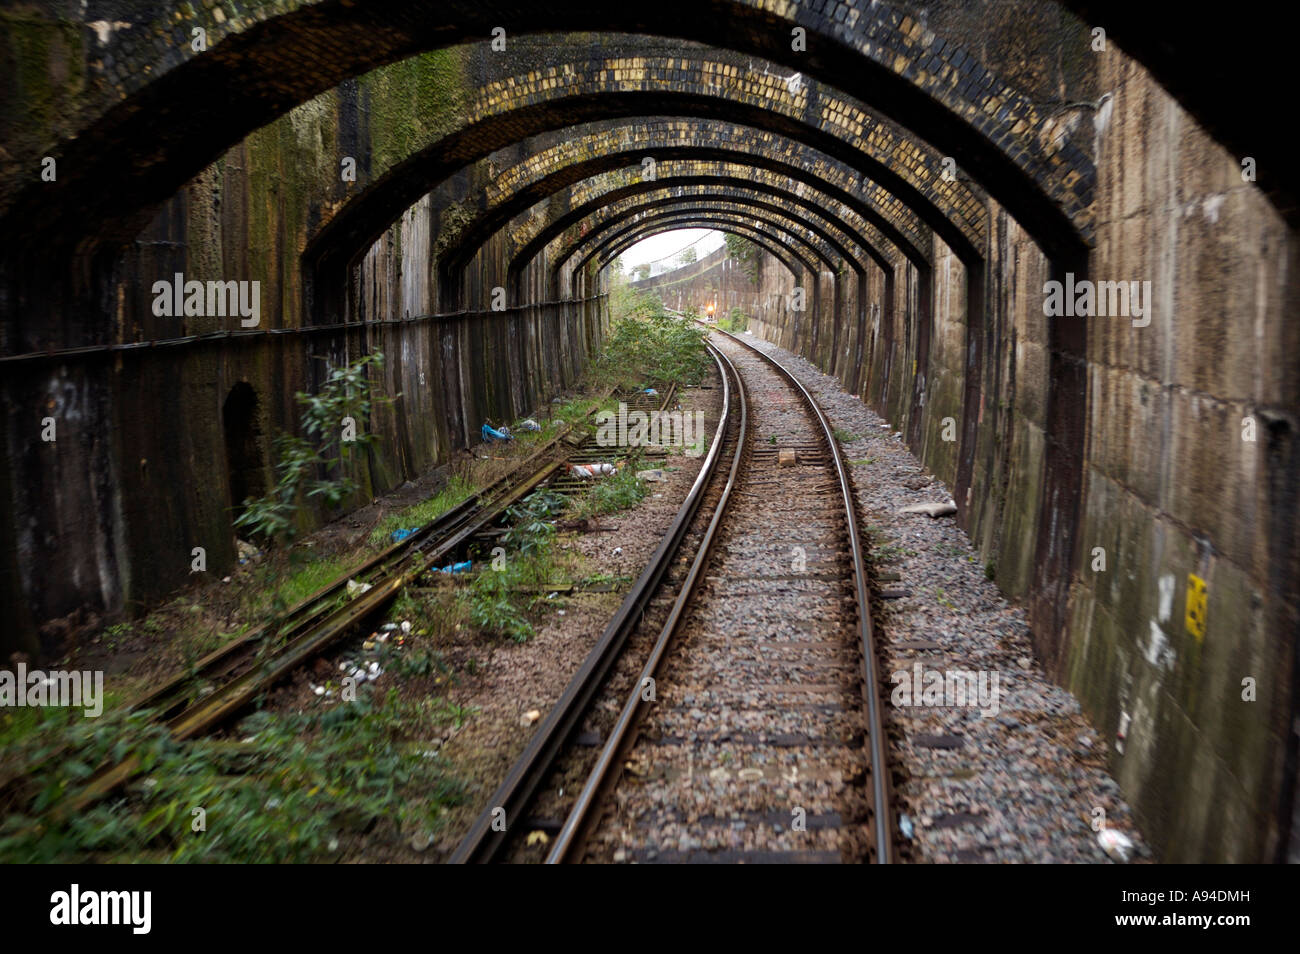 Drivers view of railway track, North London line, Between Woolwich and Stratford Stock Photo